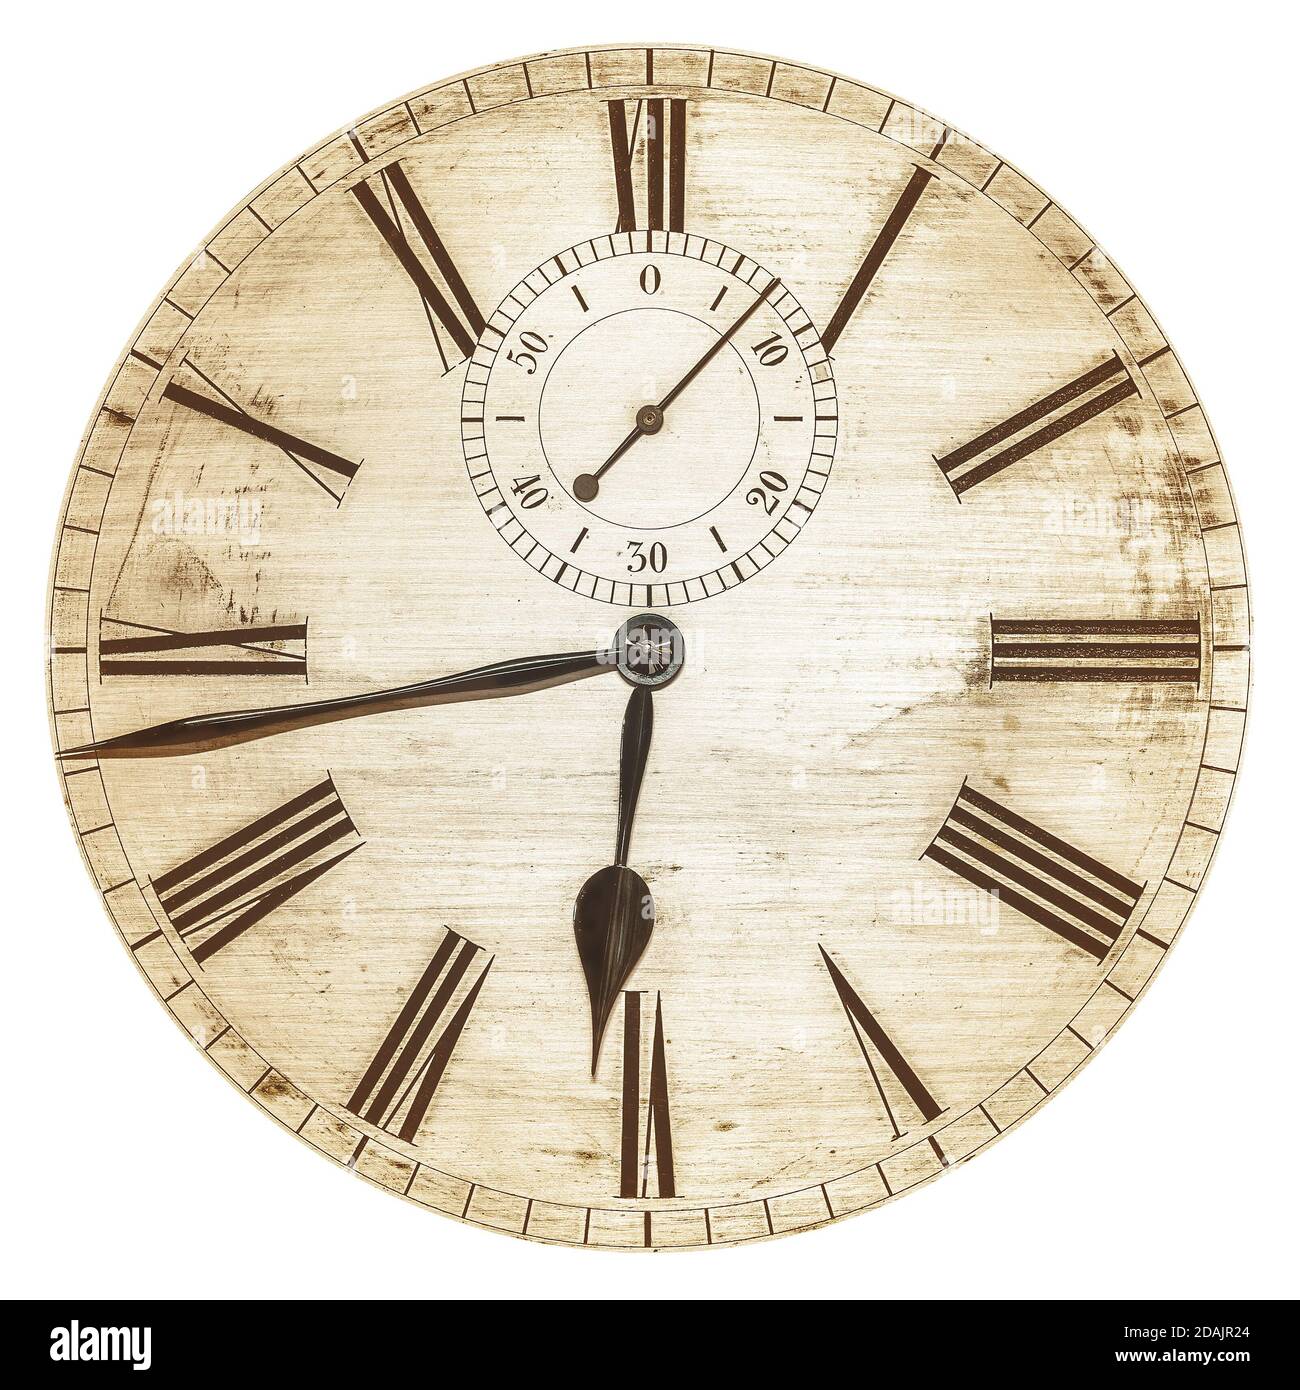 Sepia toned image of an old clock face isolated on a white background Stock Photo